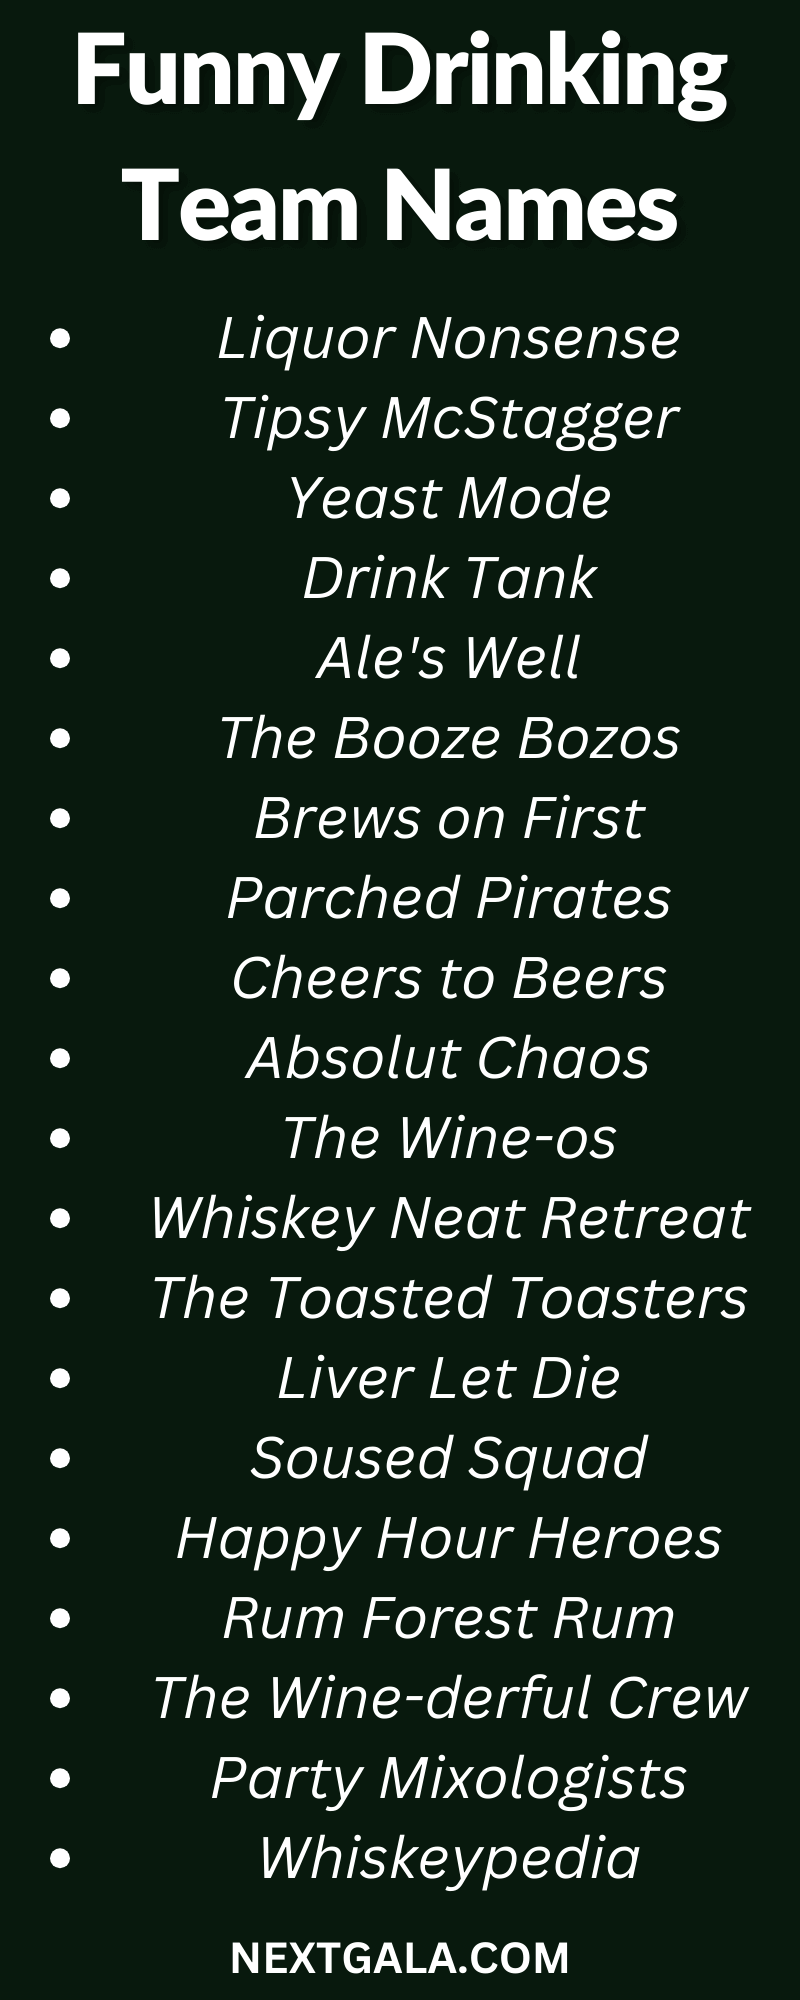 Funny Drinking Team Names